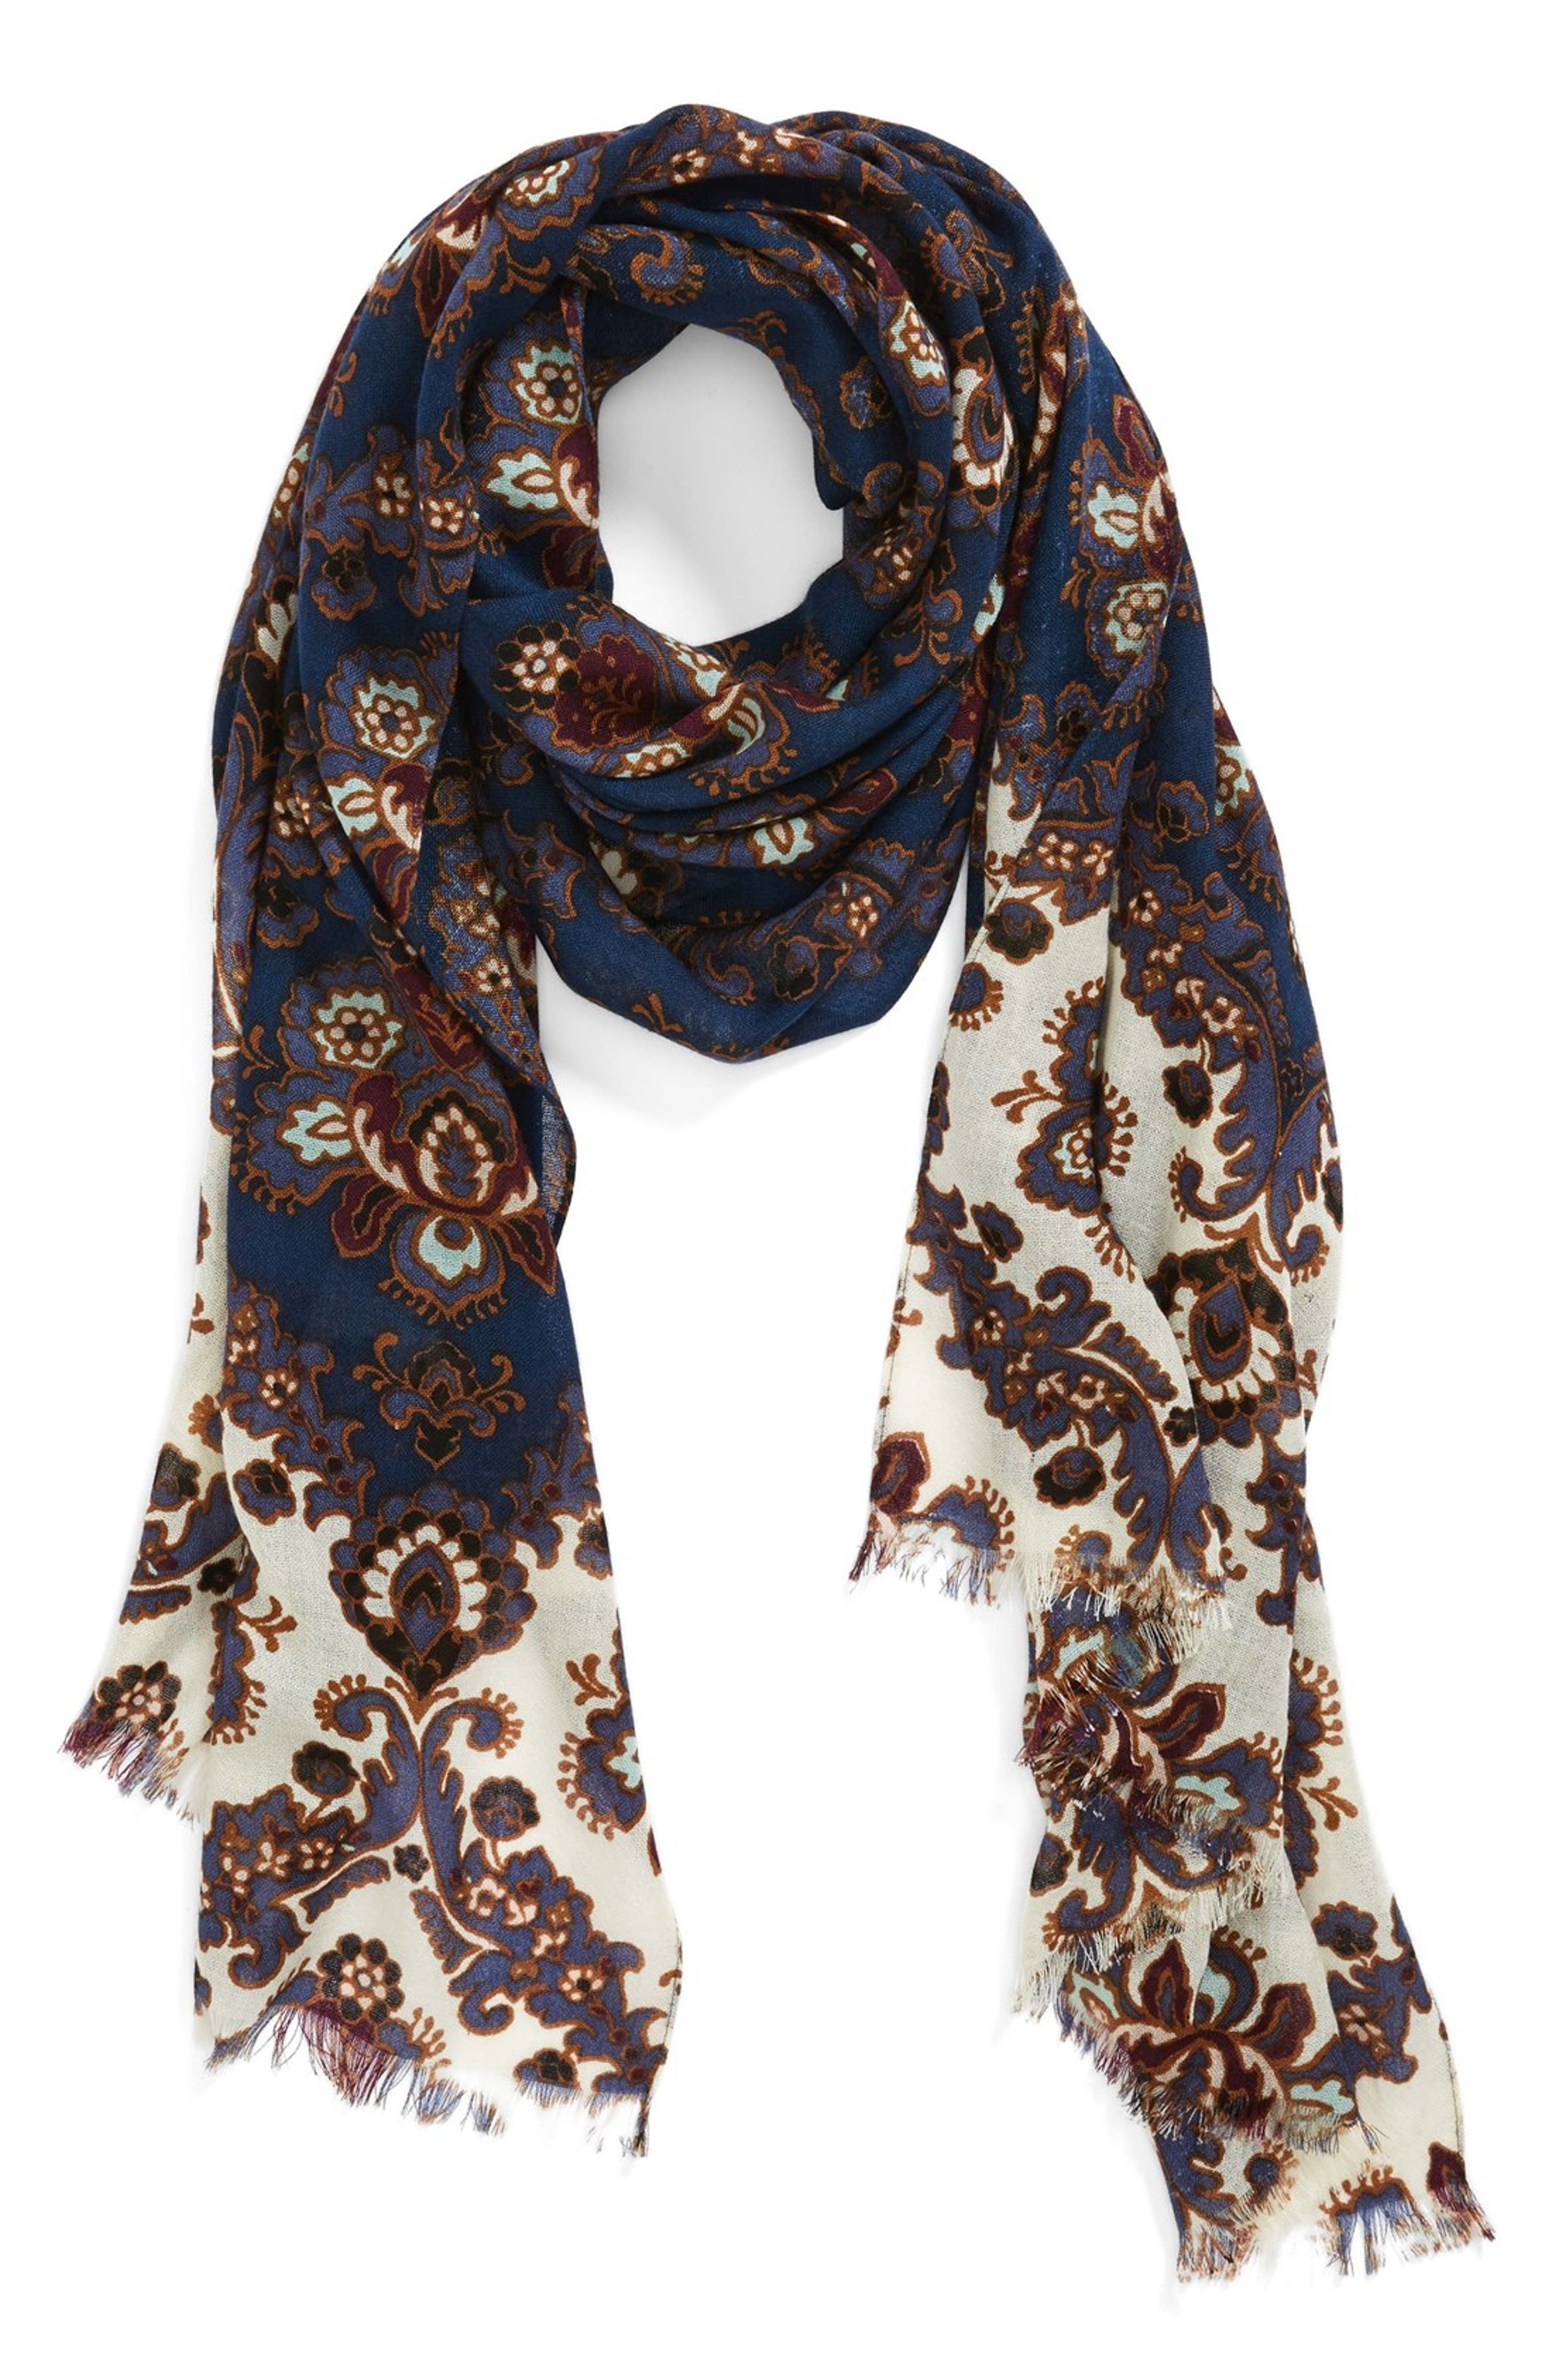 Tory Burch Printed Damask Scarf | Nordstrom